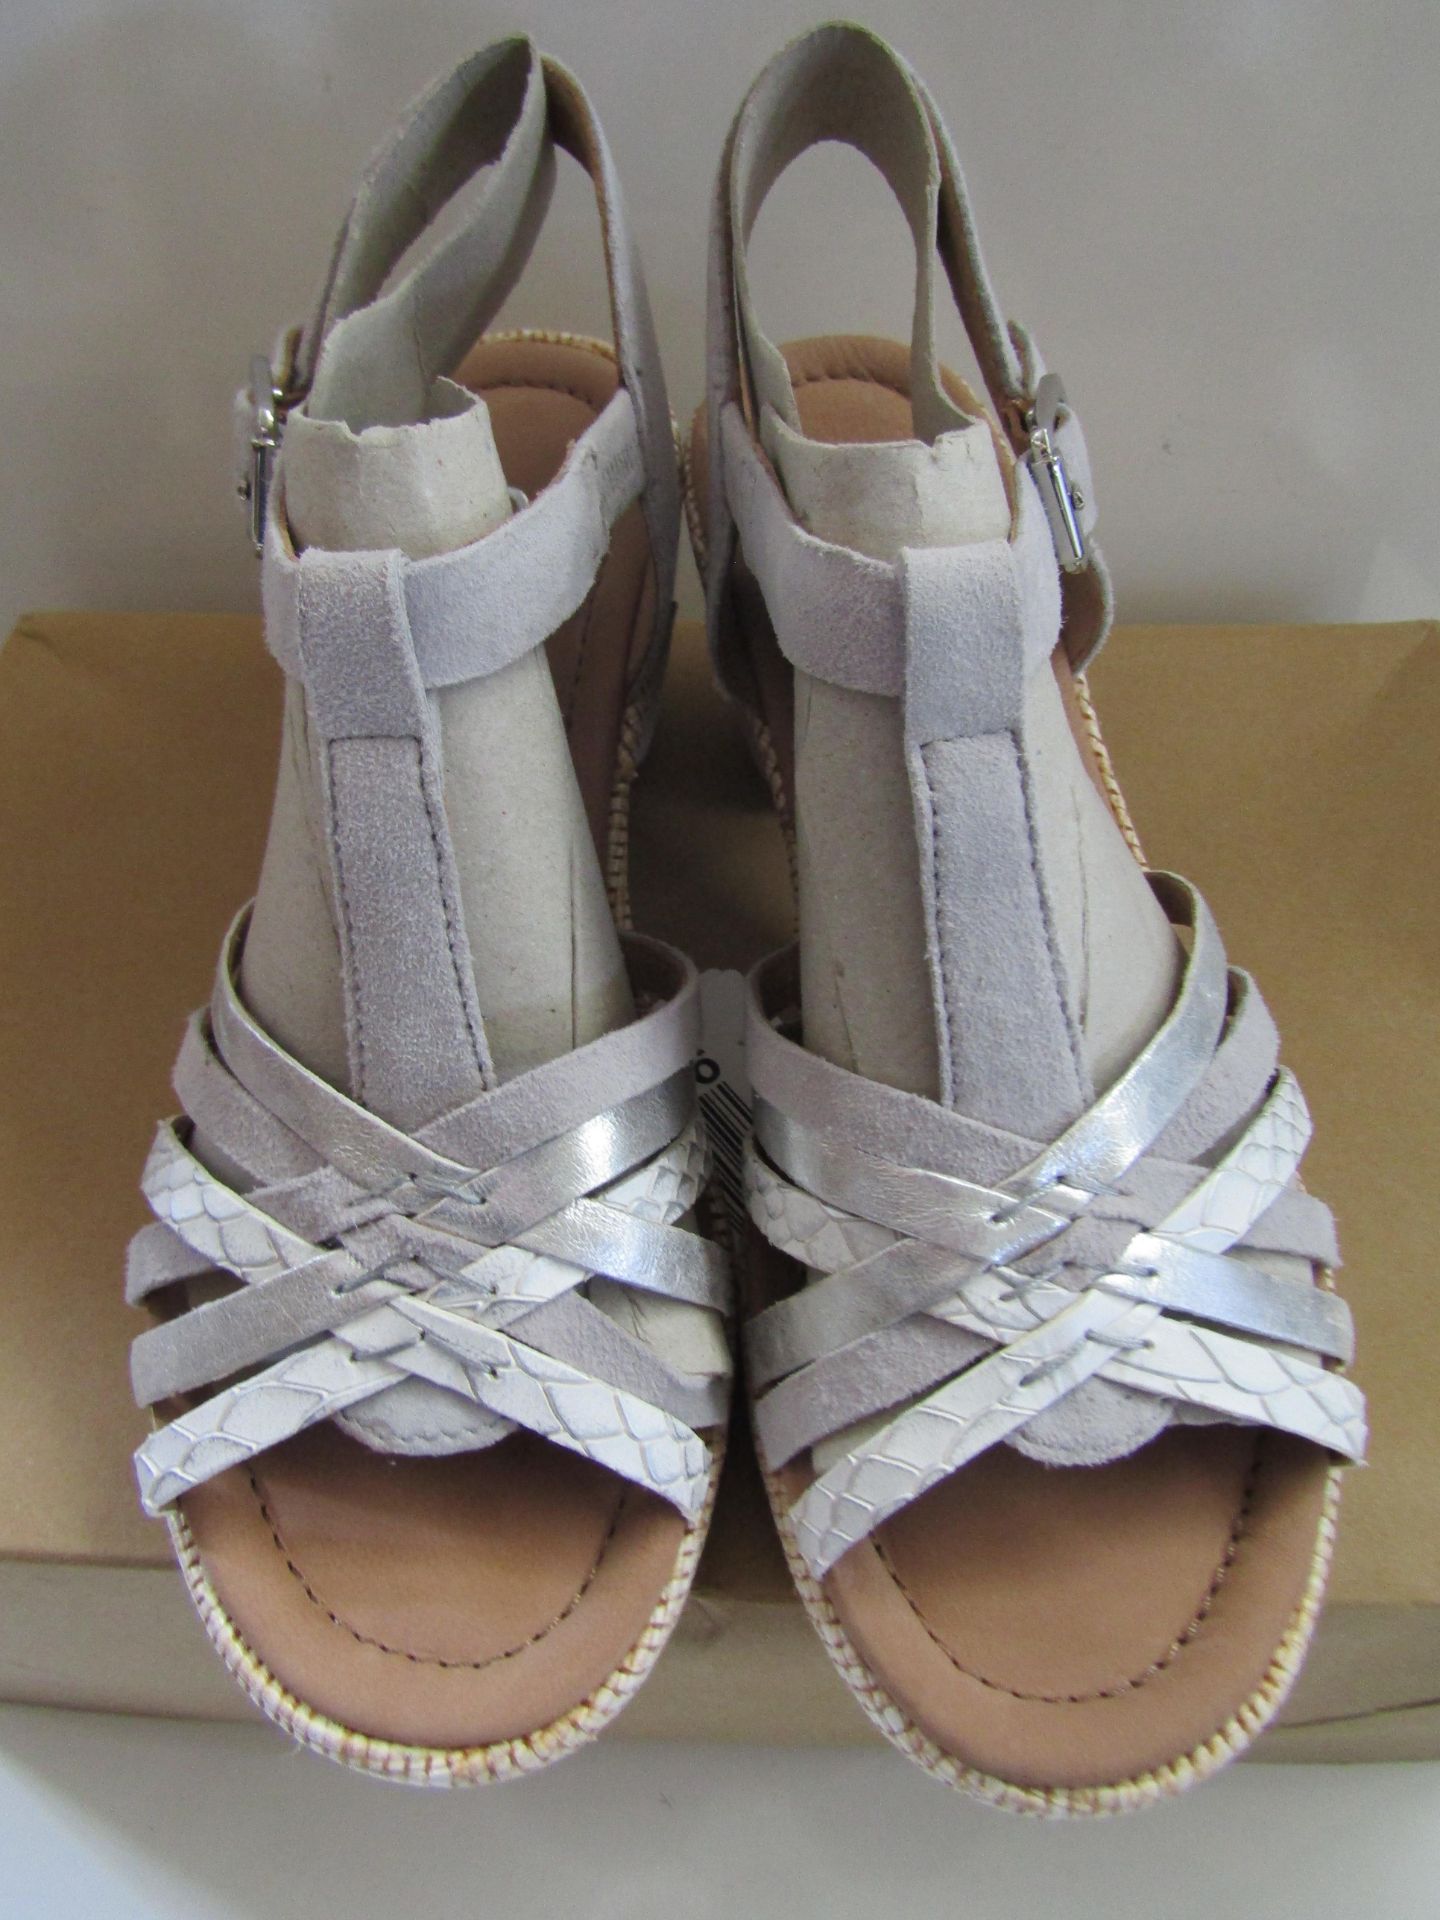 Gabor Wedged Sandal Size 5.5 New & Boxed - Image 3 of 3